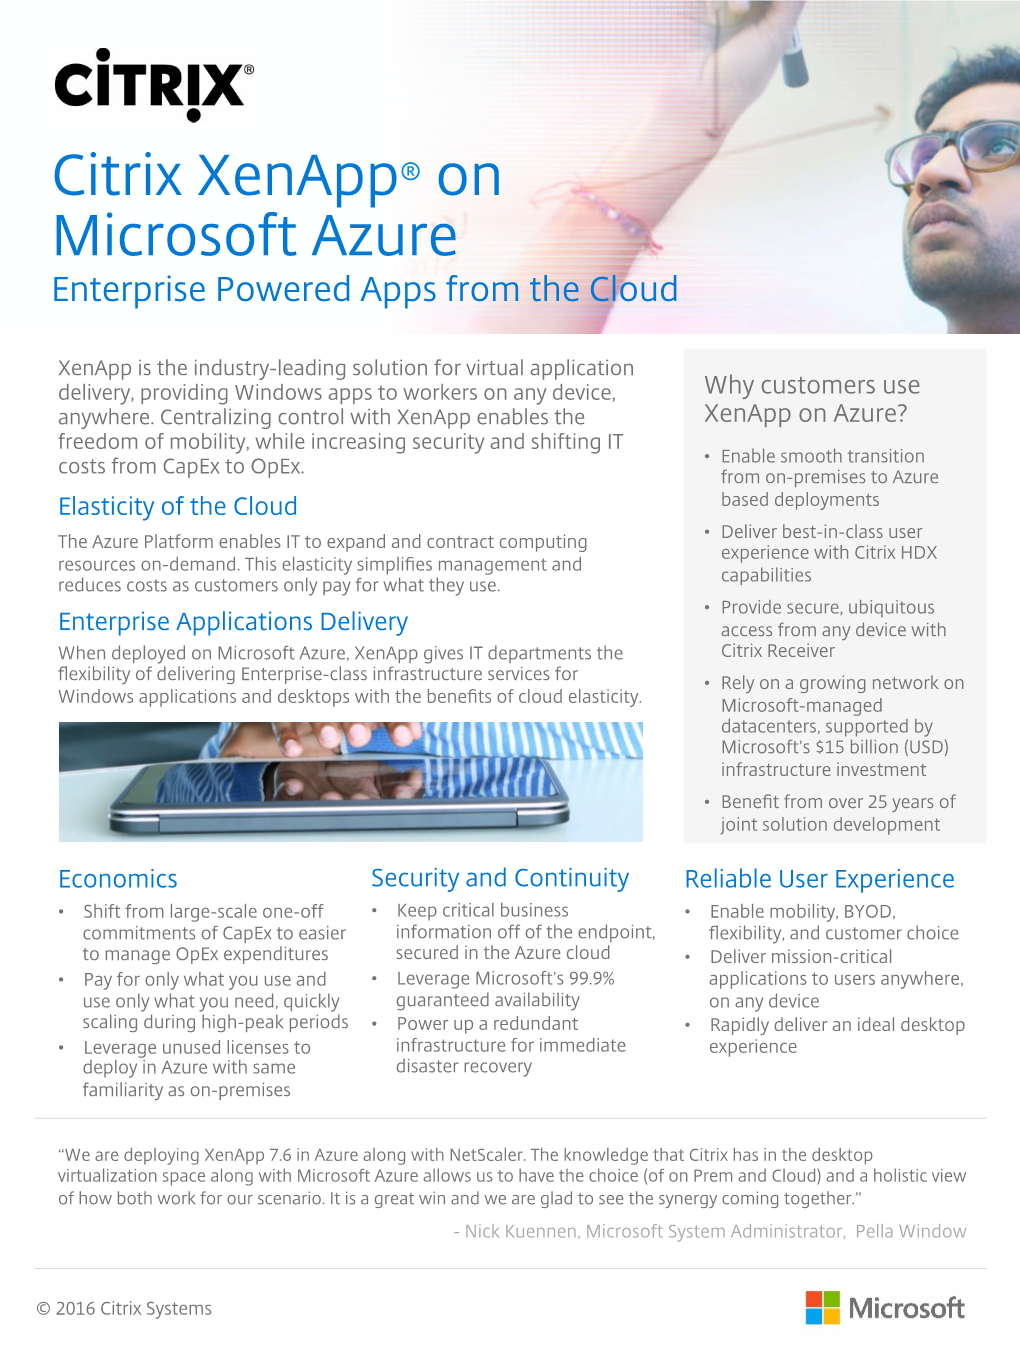 Citrix Xenapp® on Microsoft Azure Enterprise Powered Apps from the Cloud